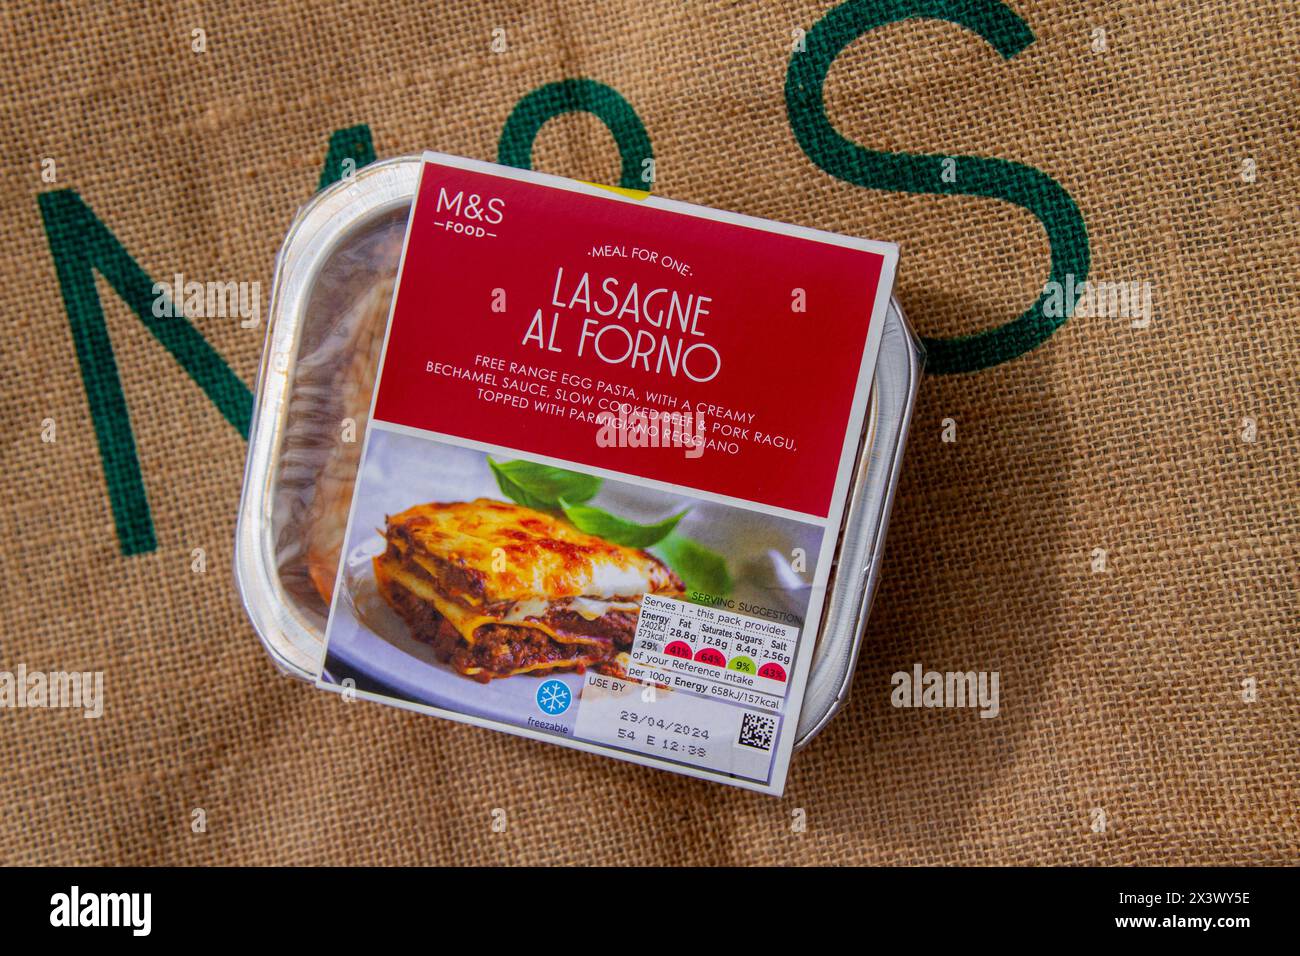 Preston, Lancashire.  29 Apr 2024.  Red label foods with extraordinarily high salt content for sale in Marks & Spencer.  Lasagne Sl Forno ready meals. Credit; MediaWorldImages/AlamyLiveNews Stock Photo